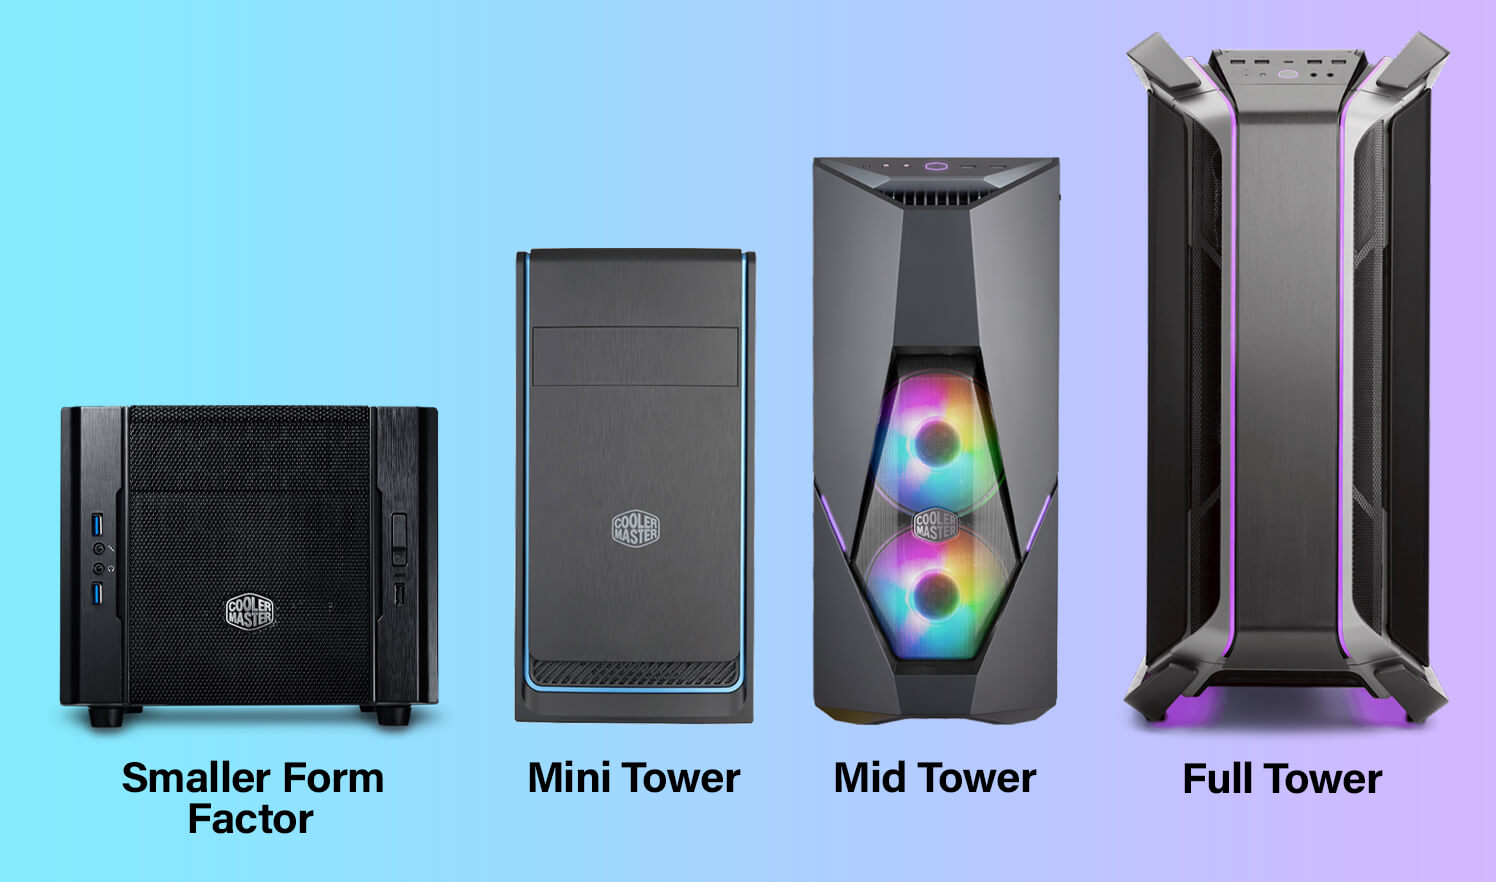 The Different Pc Case Sizes Explained From Full Tower To Mini Itx Cases ...